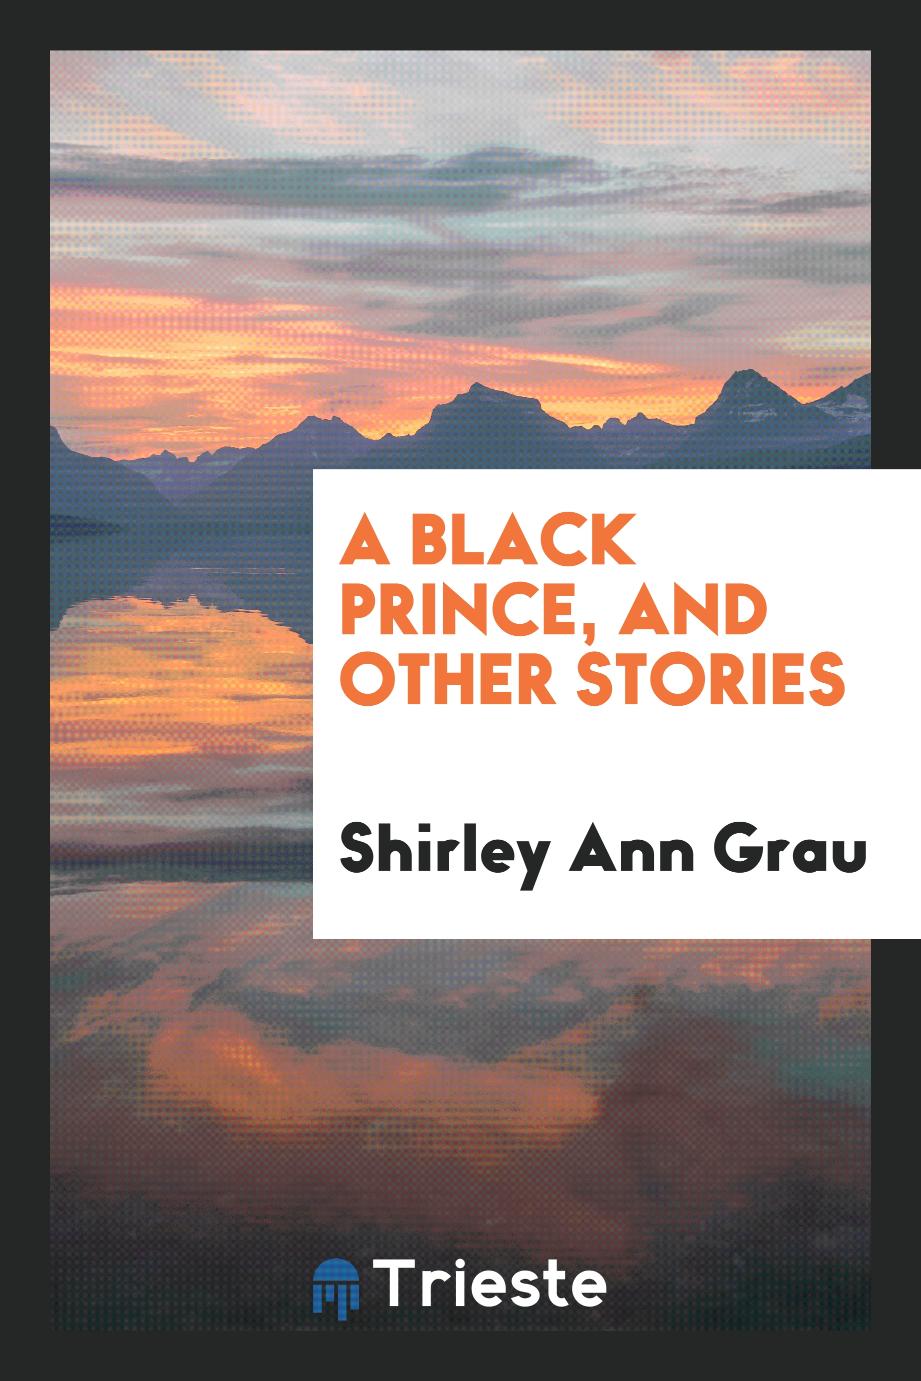 Shirley Ann Grau - A black prince, and other stories